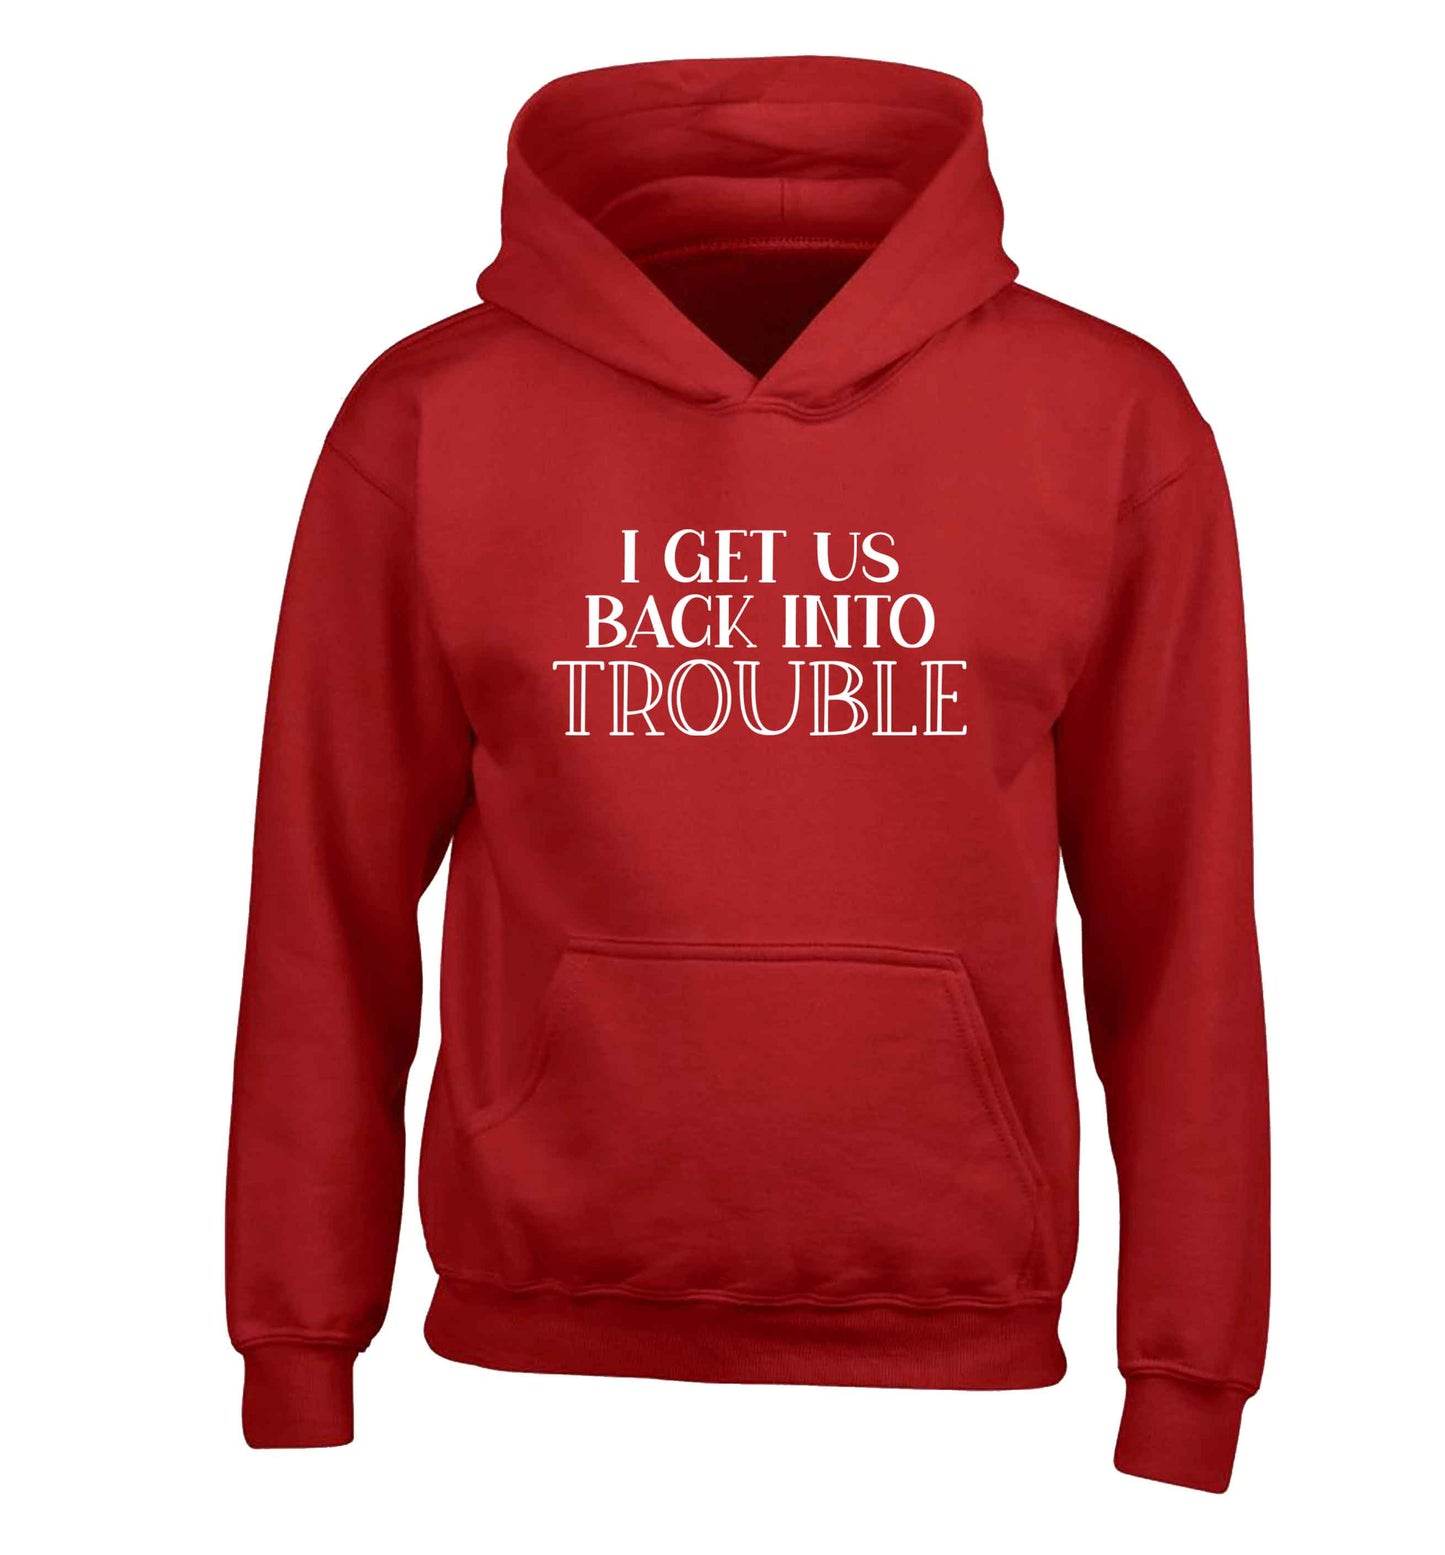 I get us back into trouble children's red hoodie 12-13 Years